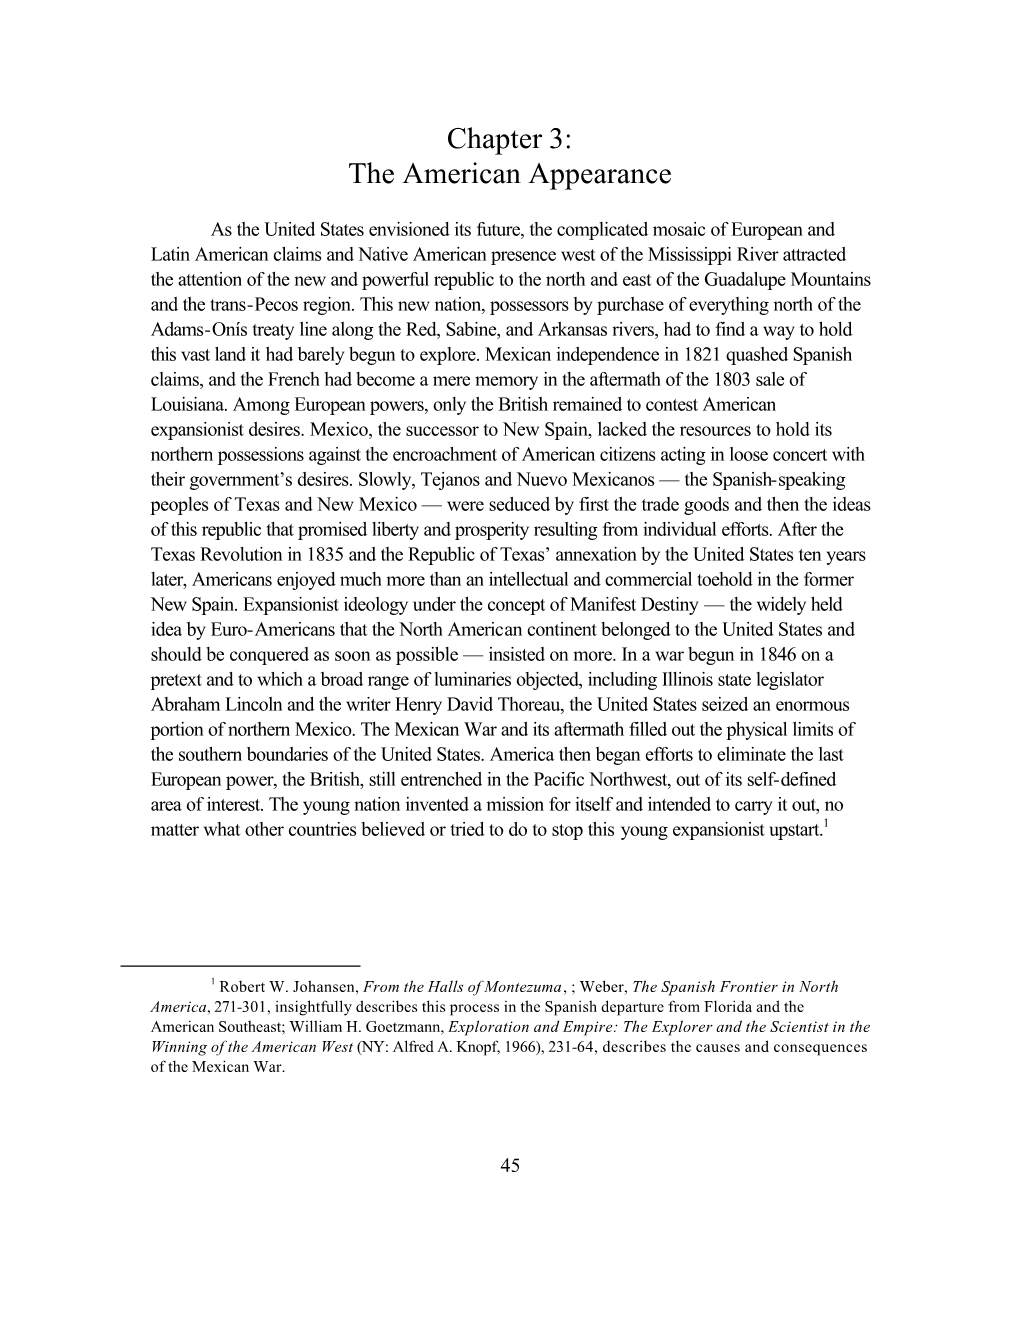 Chapter 3: the American Appearance